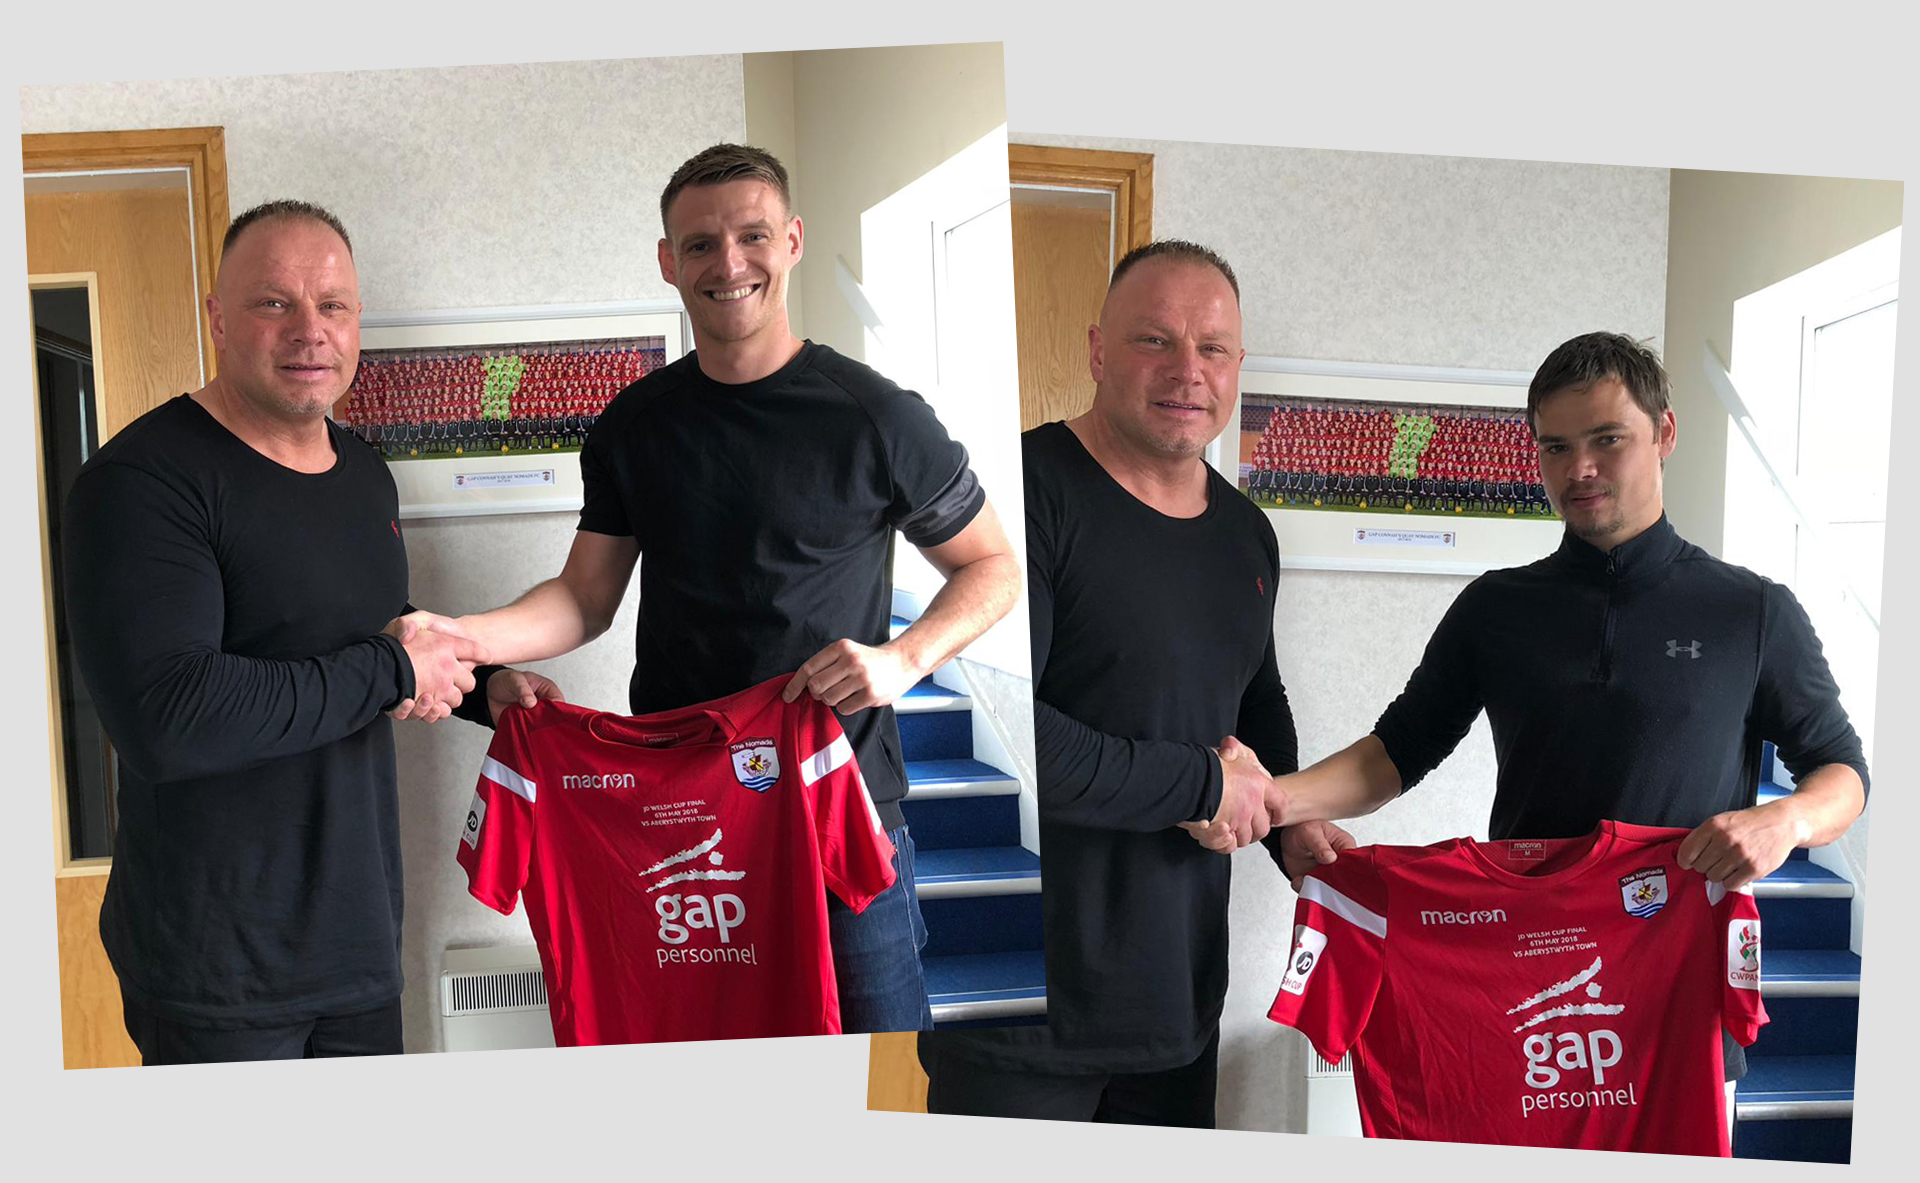 Andy Morrison pictured with new signings, Michael Parker (left) and Noah Edwards (right)